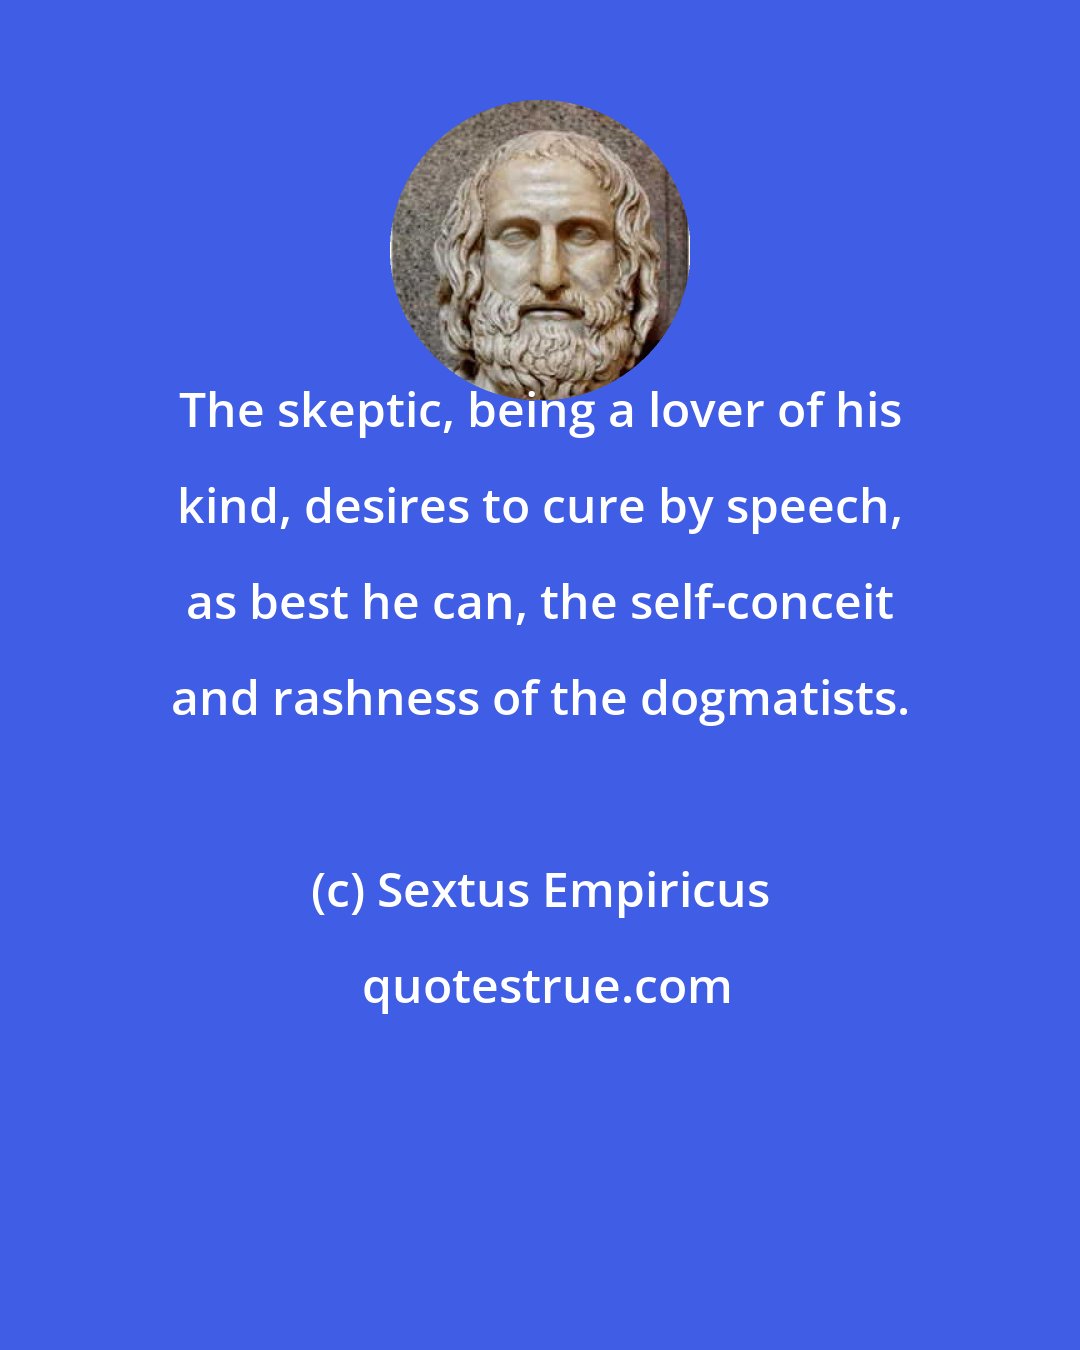 Sextus Empiricus: The skeptic, being a lover of his kind, desires to cure by speech, as best he can, the self-conceit and rashness of the dogmatists.